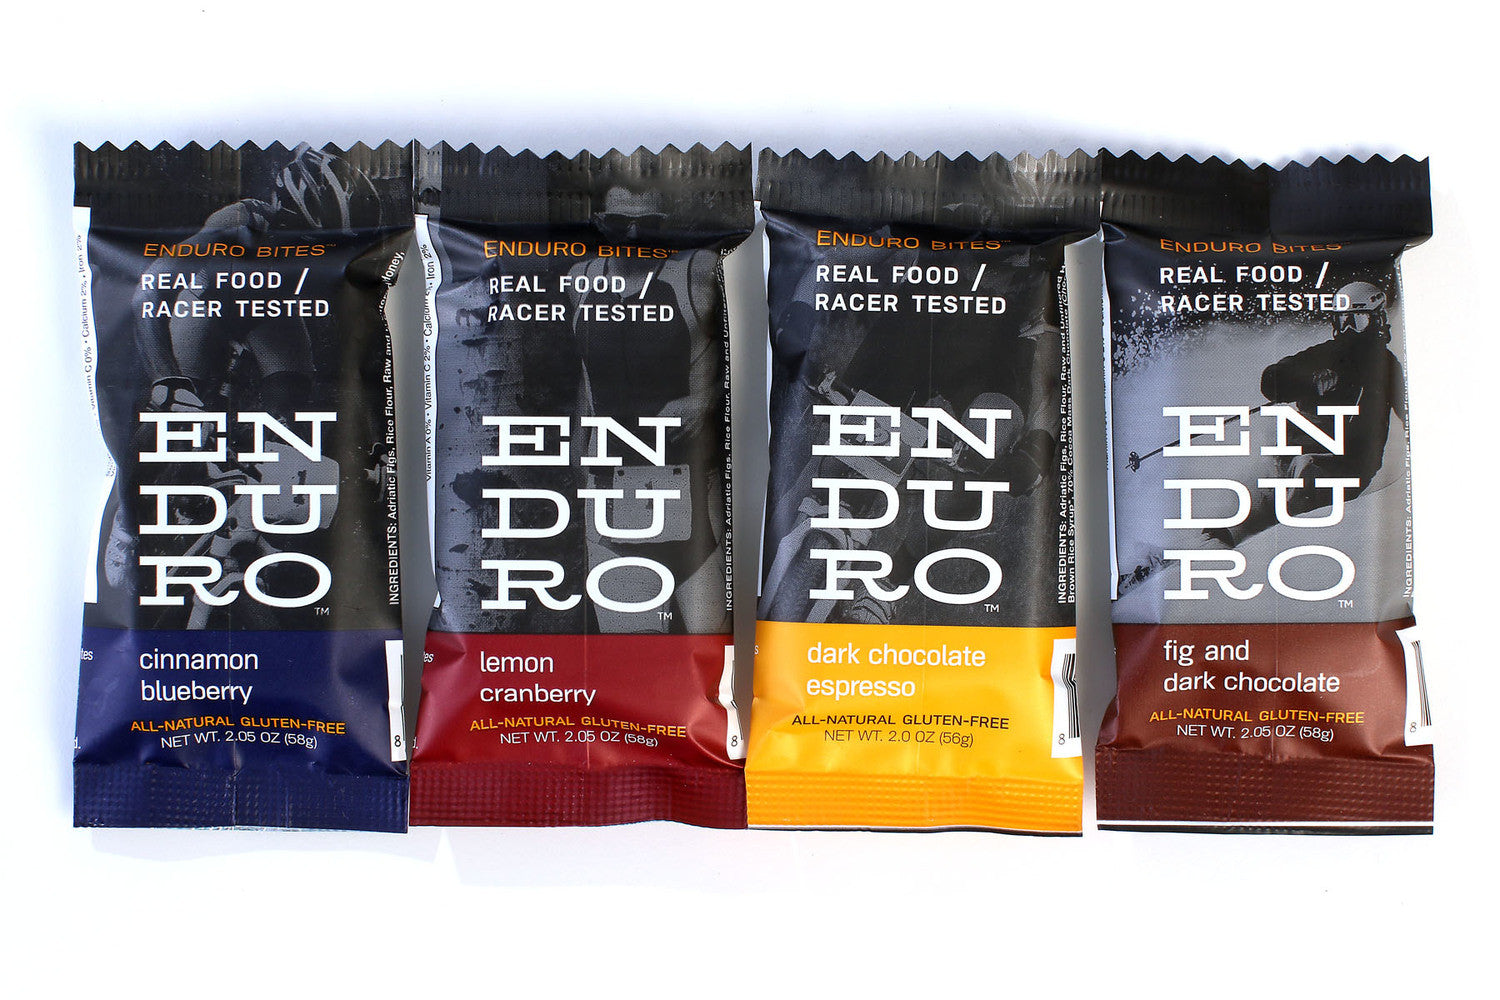 New Enduro Bites Flavors and Packaging